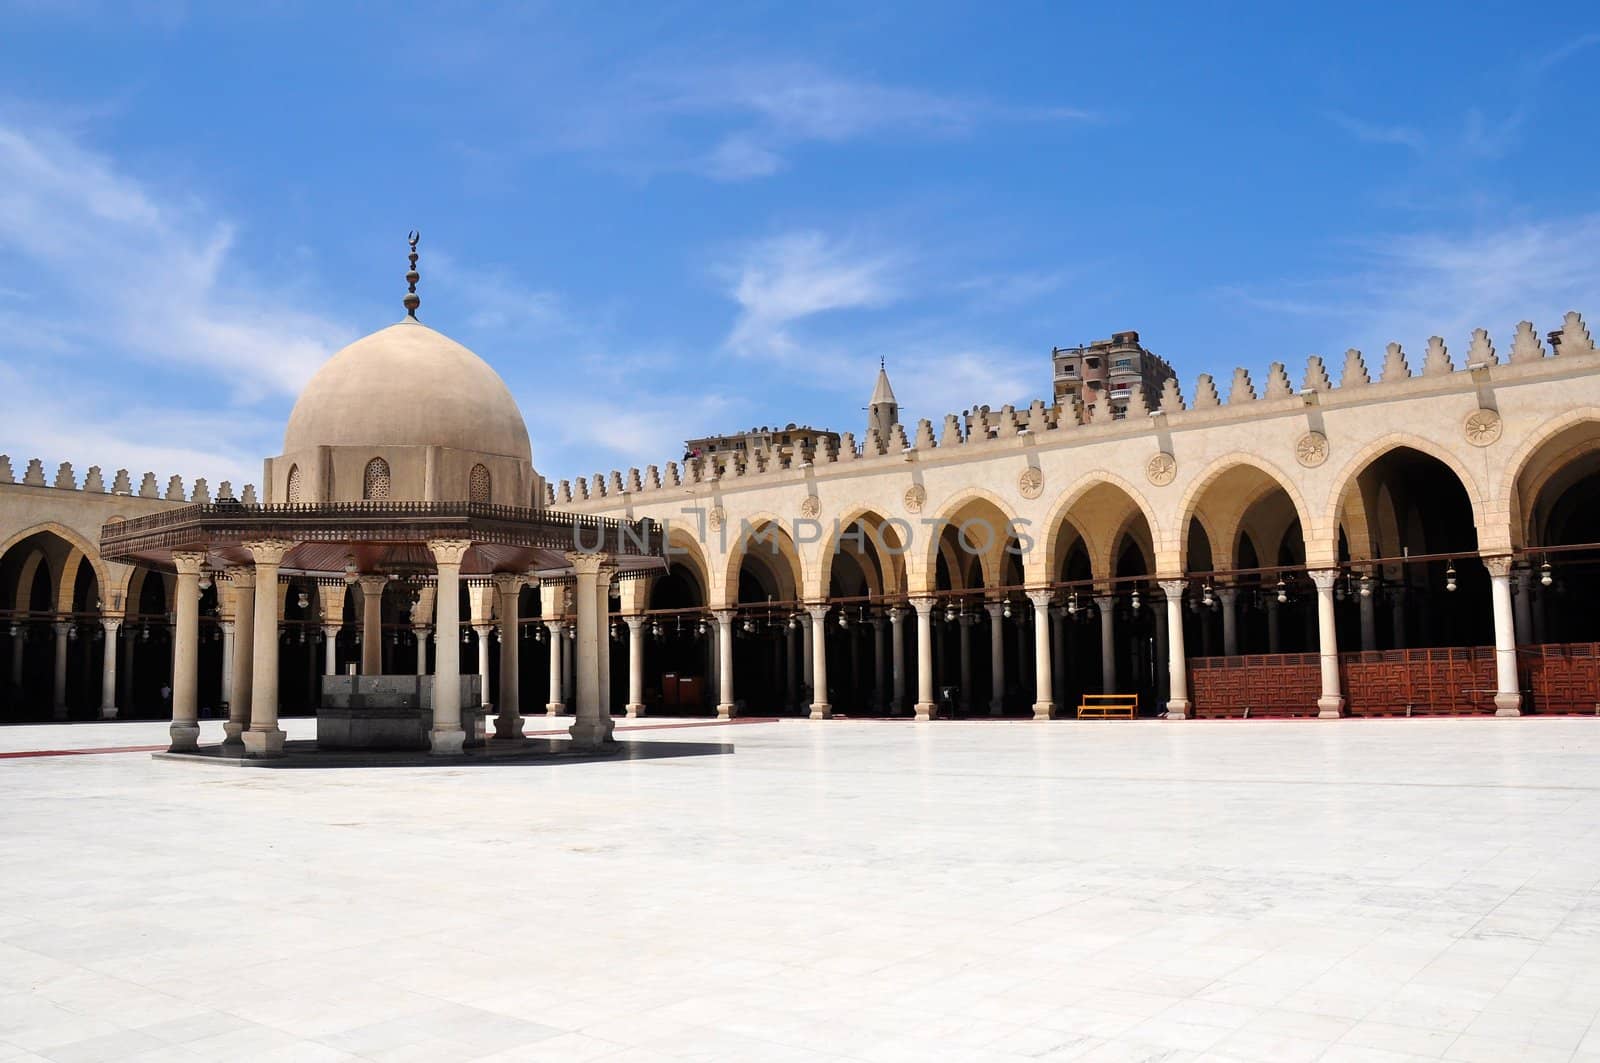 The Mosque of Amr ibn al-As, also called the Mosque of Amr, was originally built in 642 AD, as the center of the newly-founded capital of Egypt, Fustat. The original structure was the first mosque ever built in Egypt, and by extension, the first mosque on the continent of Africa.